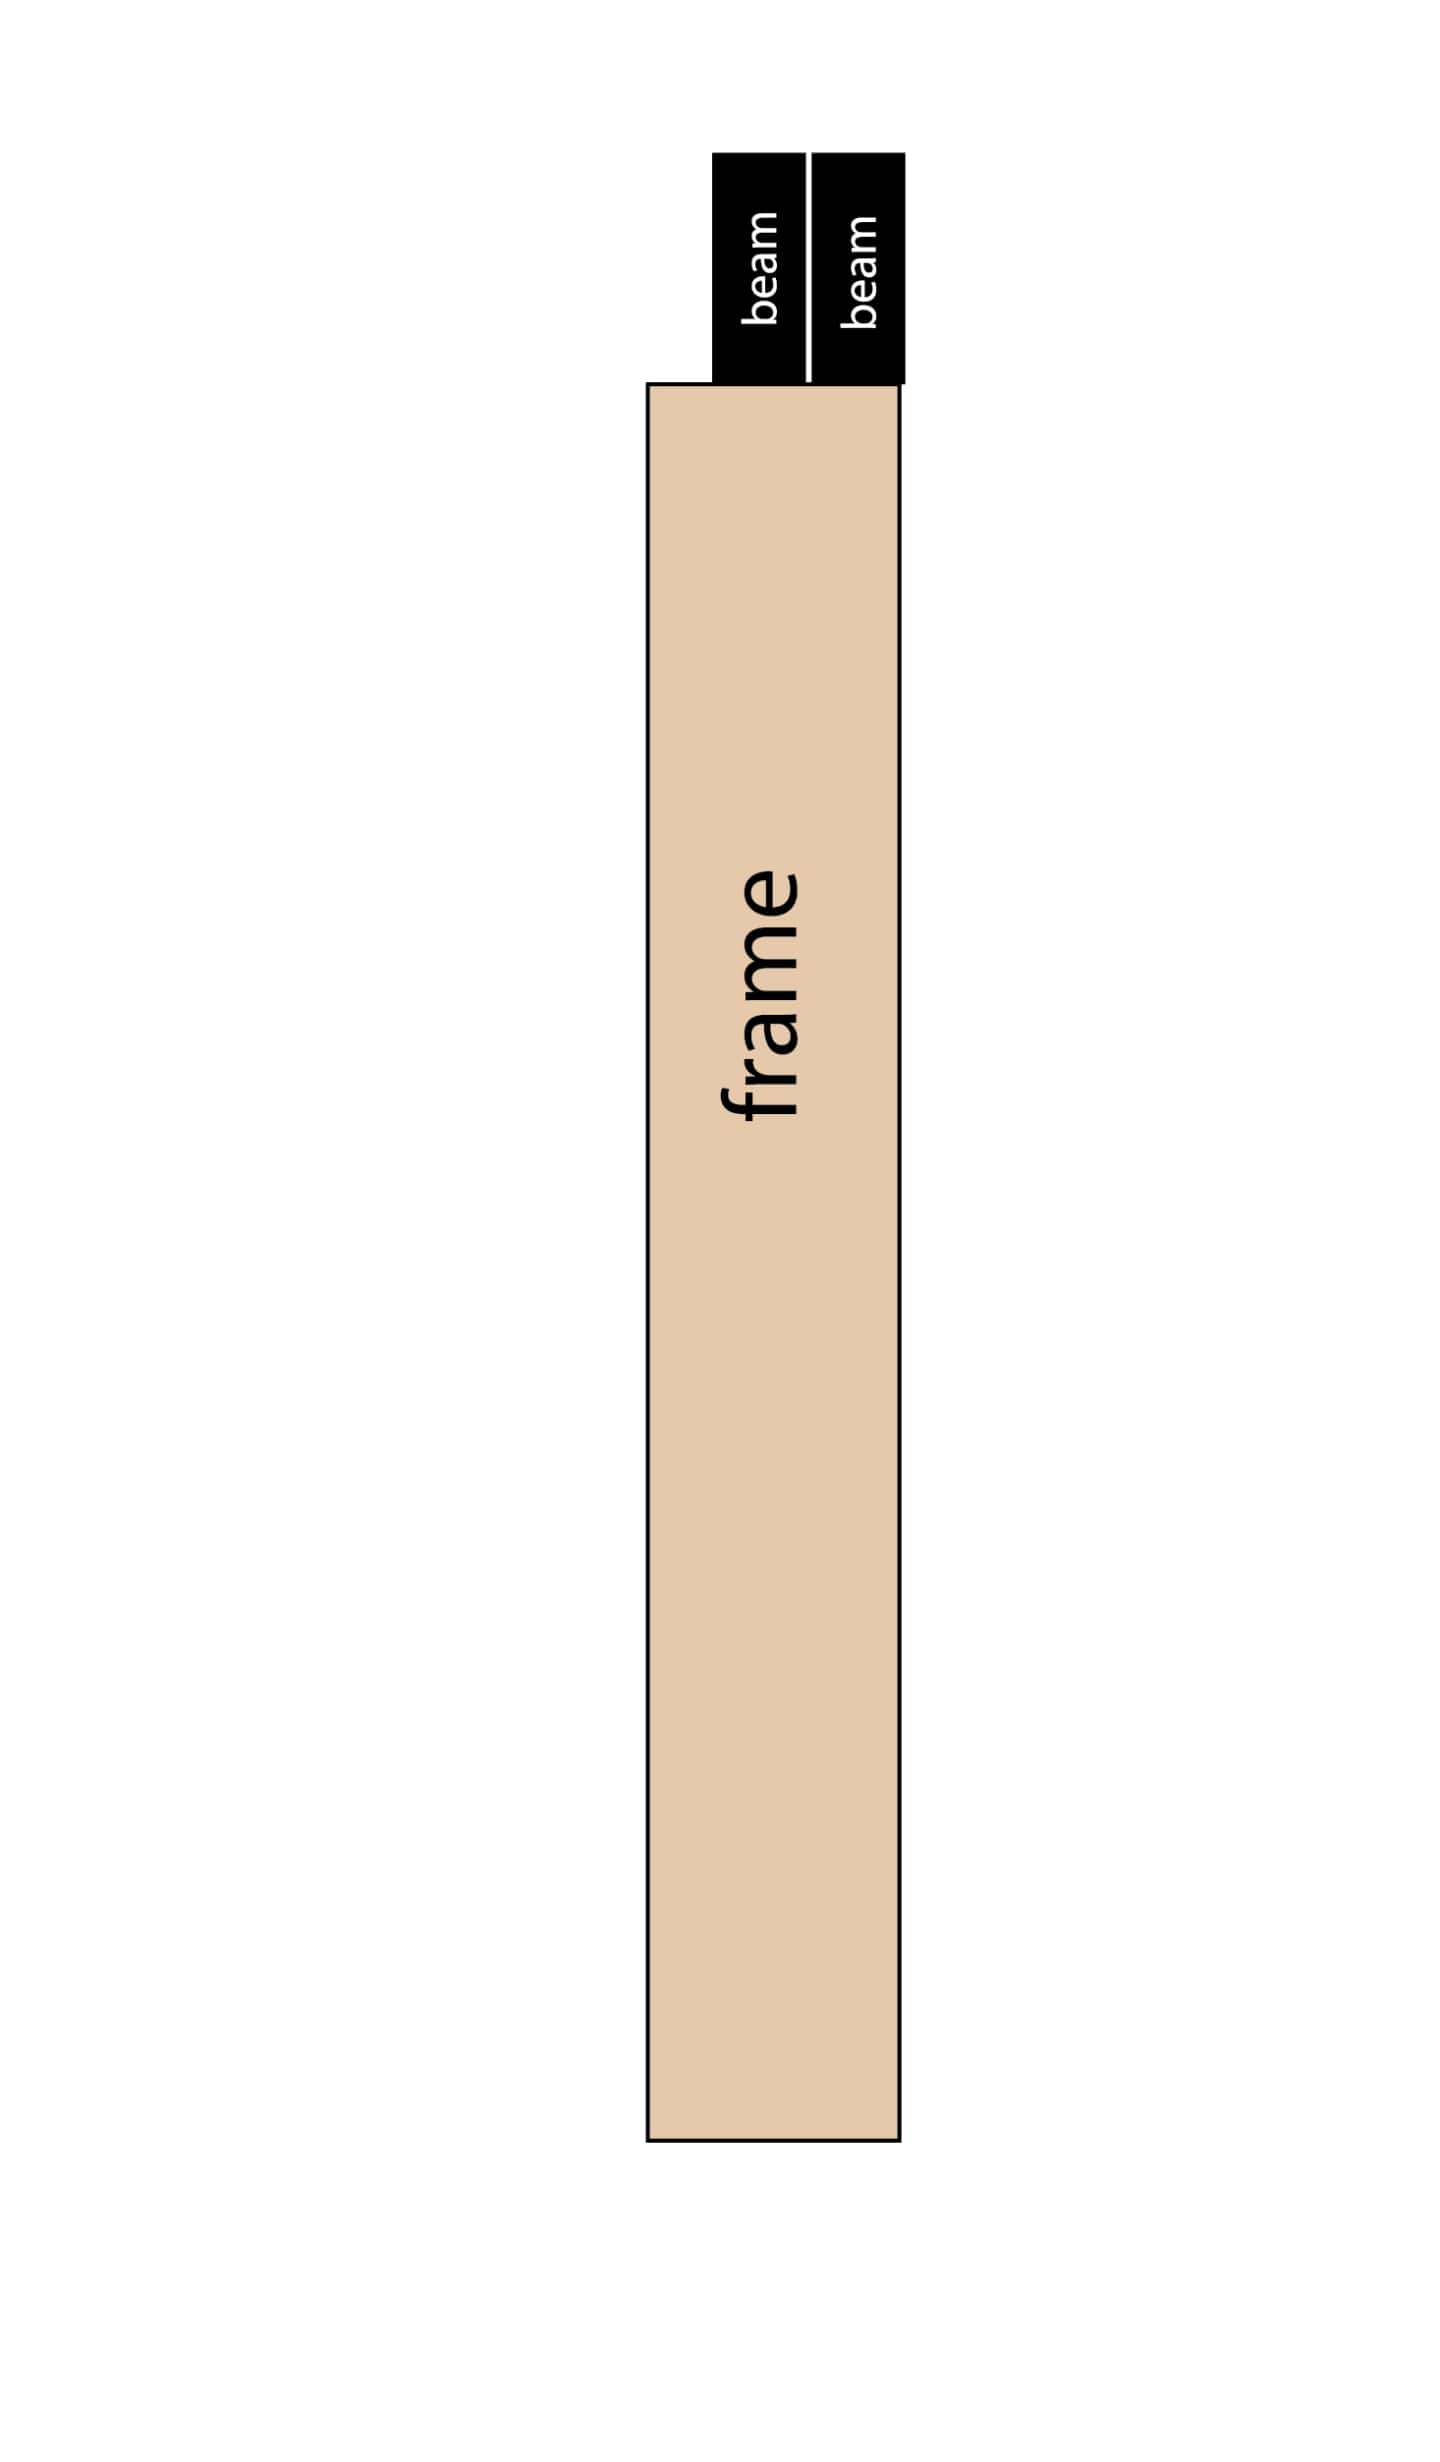 Diagram of 2x8x16 beams sitting on the outside edge of the posts/frame. 